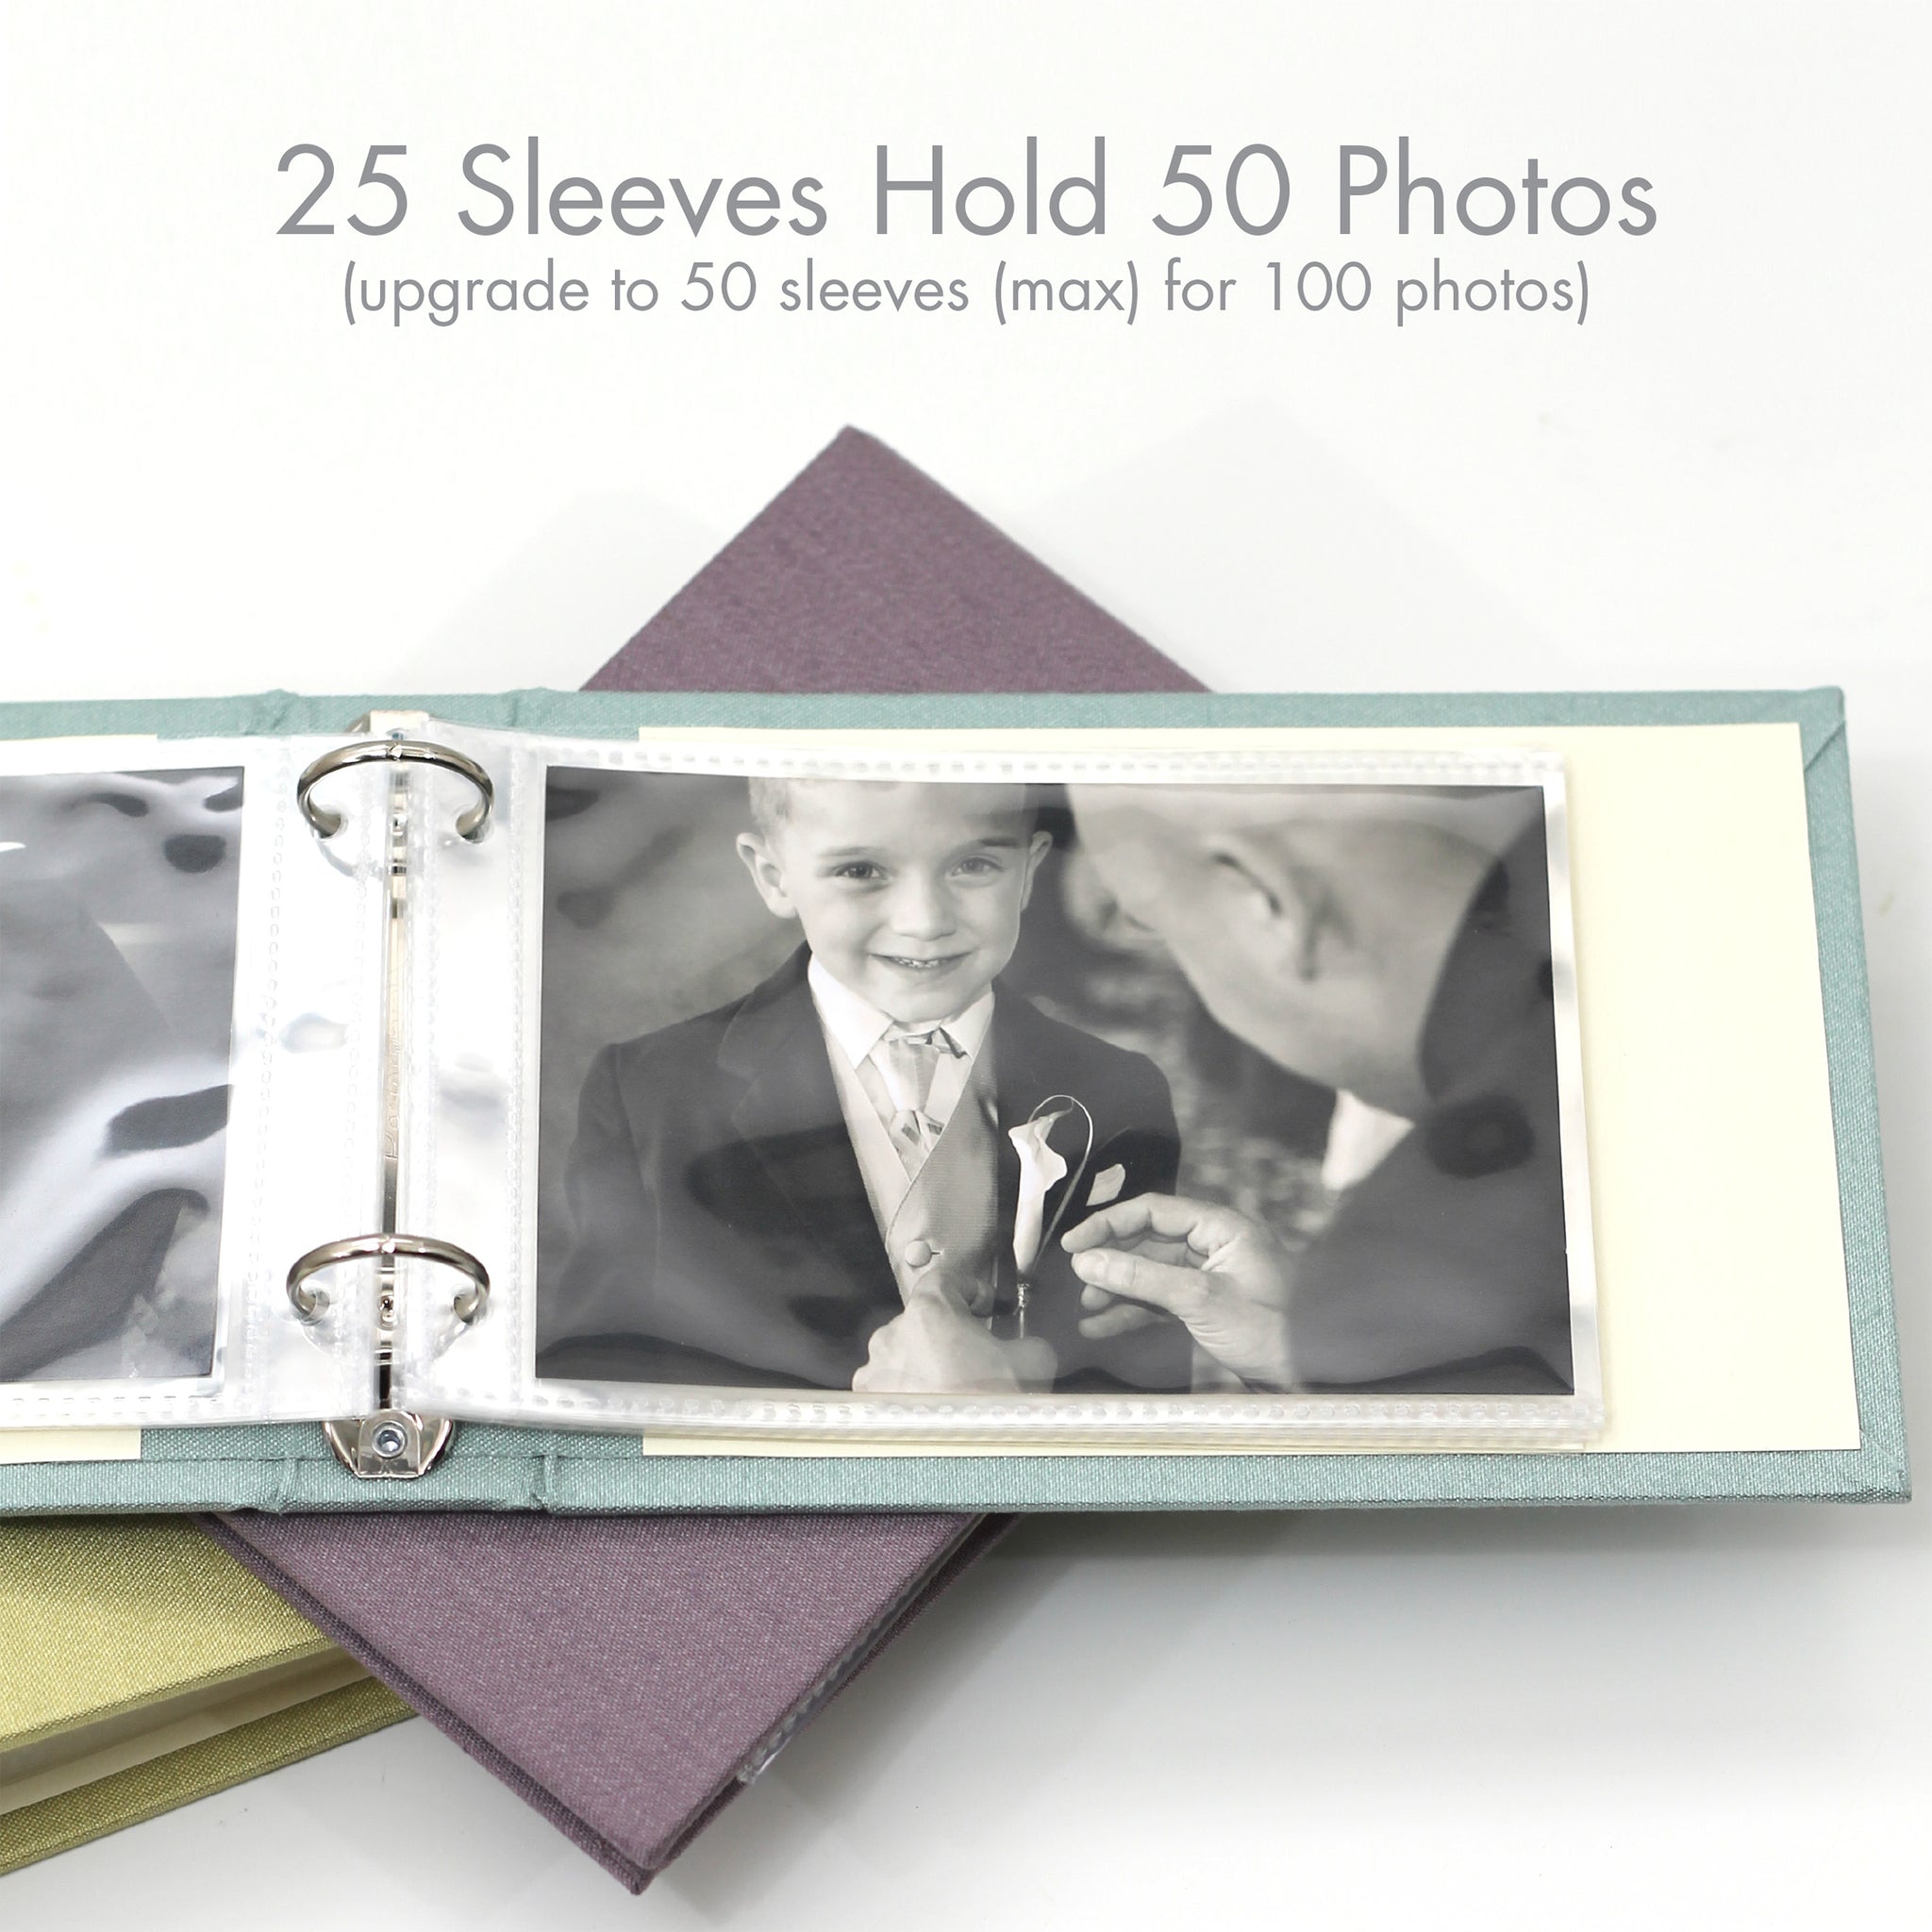 4x6 Photo Albums - Photo Album 4x6 - Small Photo Album 4x6 - Small Photo Album (Set of 8) Mini Photo Album - Photo Books for 4x6 Pictures - Small